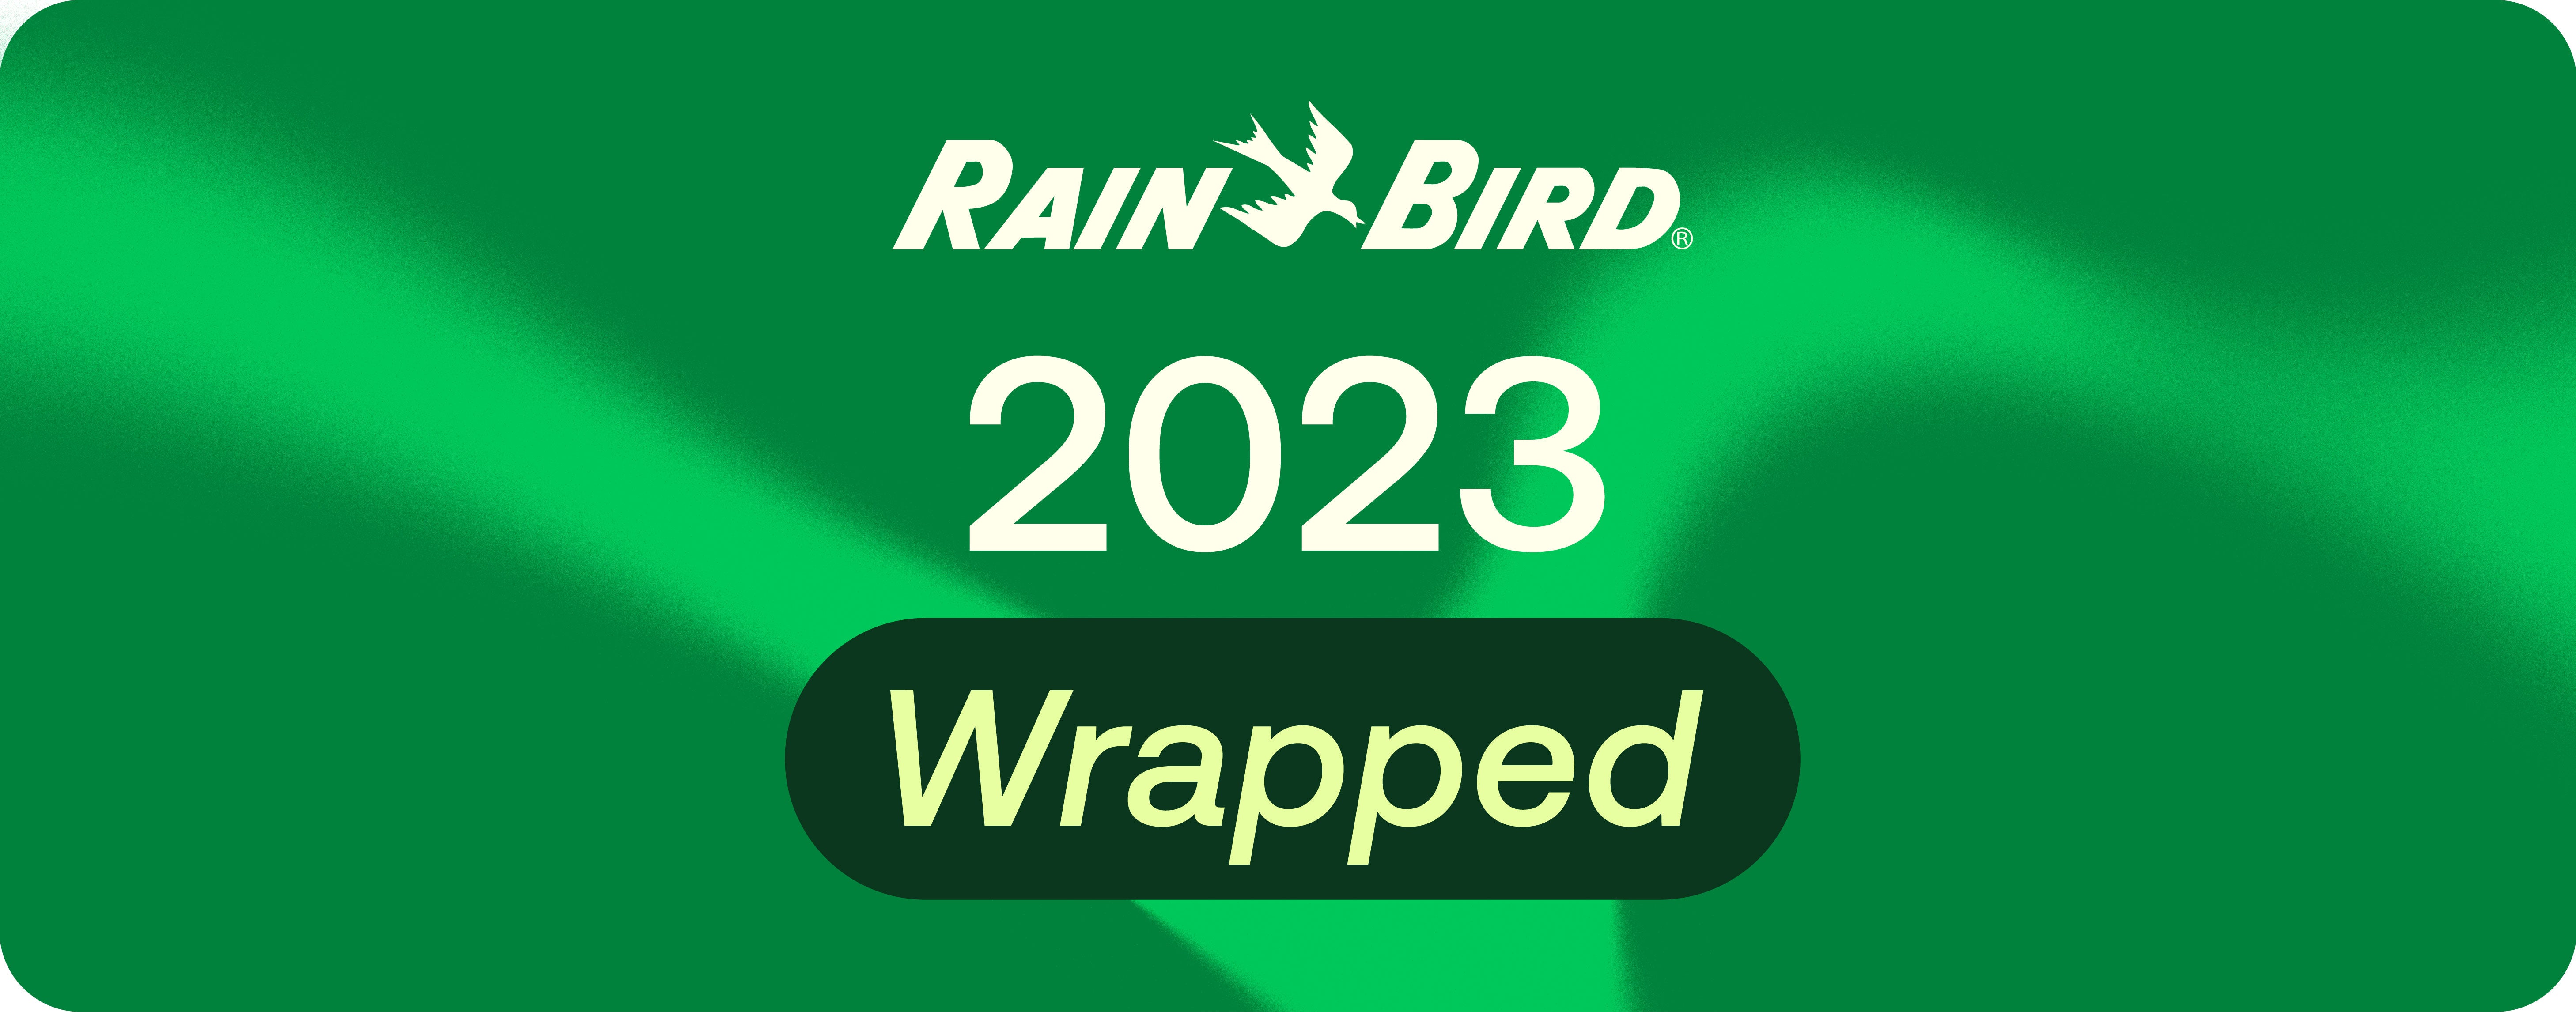 2023 Wrapped on a green wave background